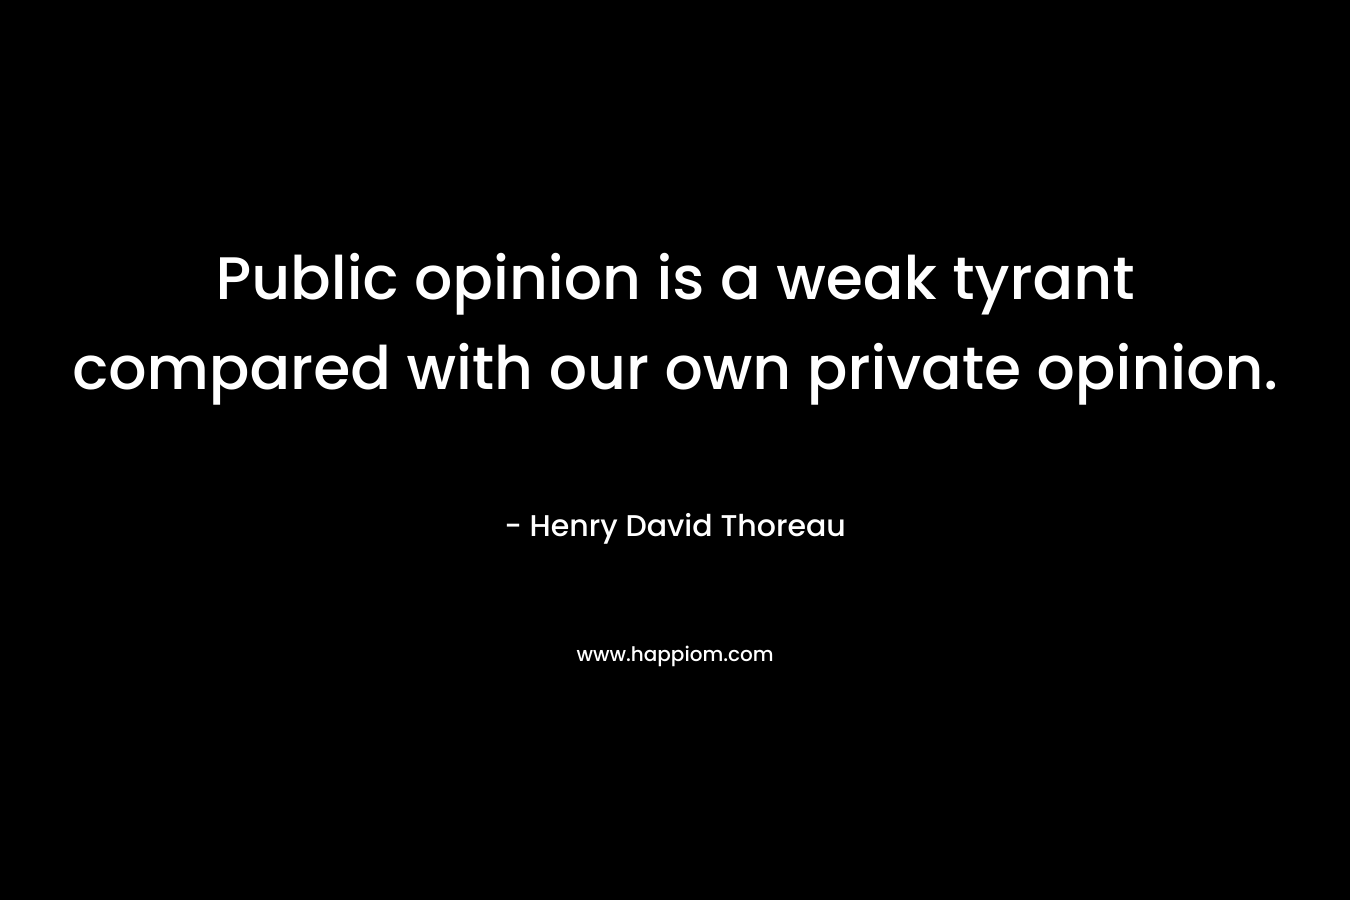 Public opinion is a weak tyrant compared with our own private opinion. – Henry David Thoreau